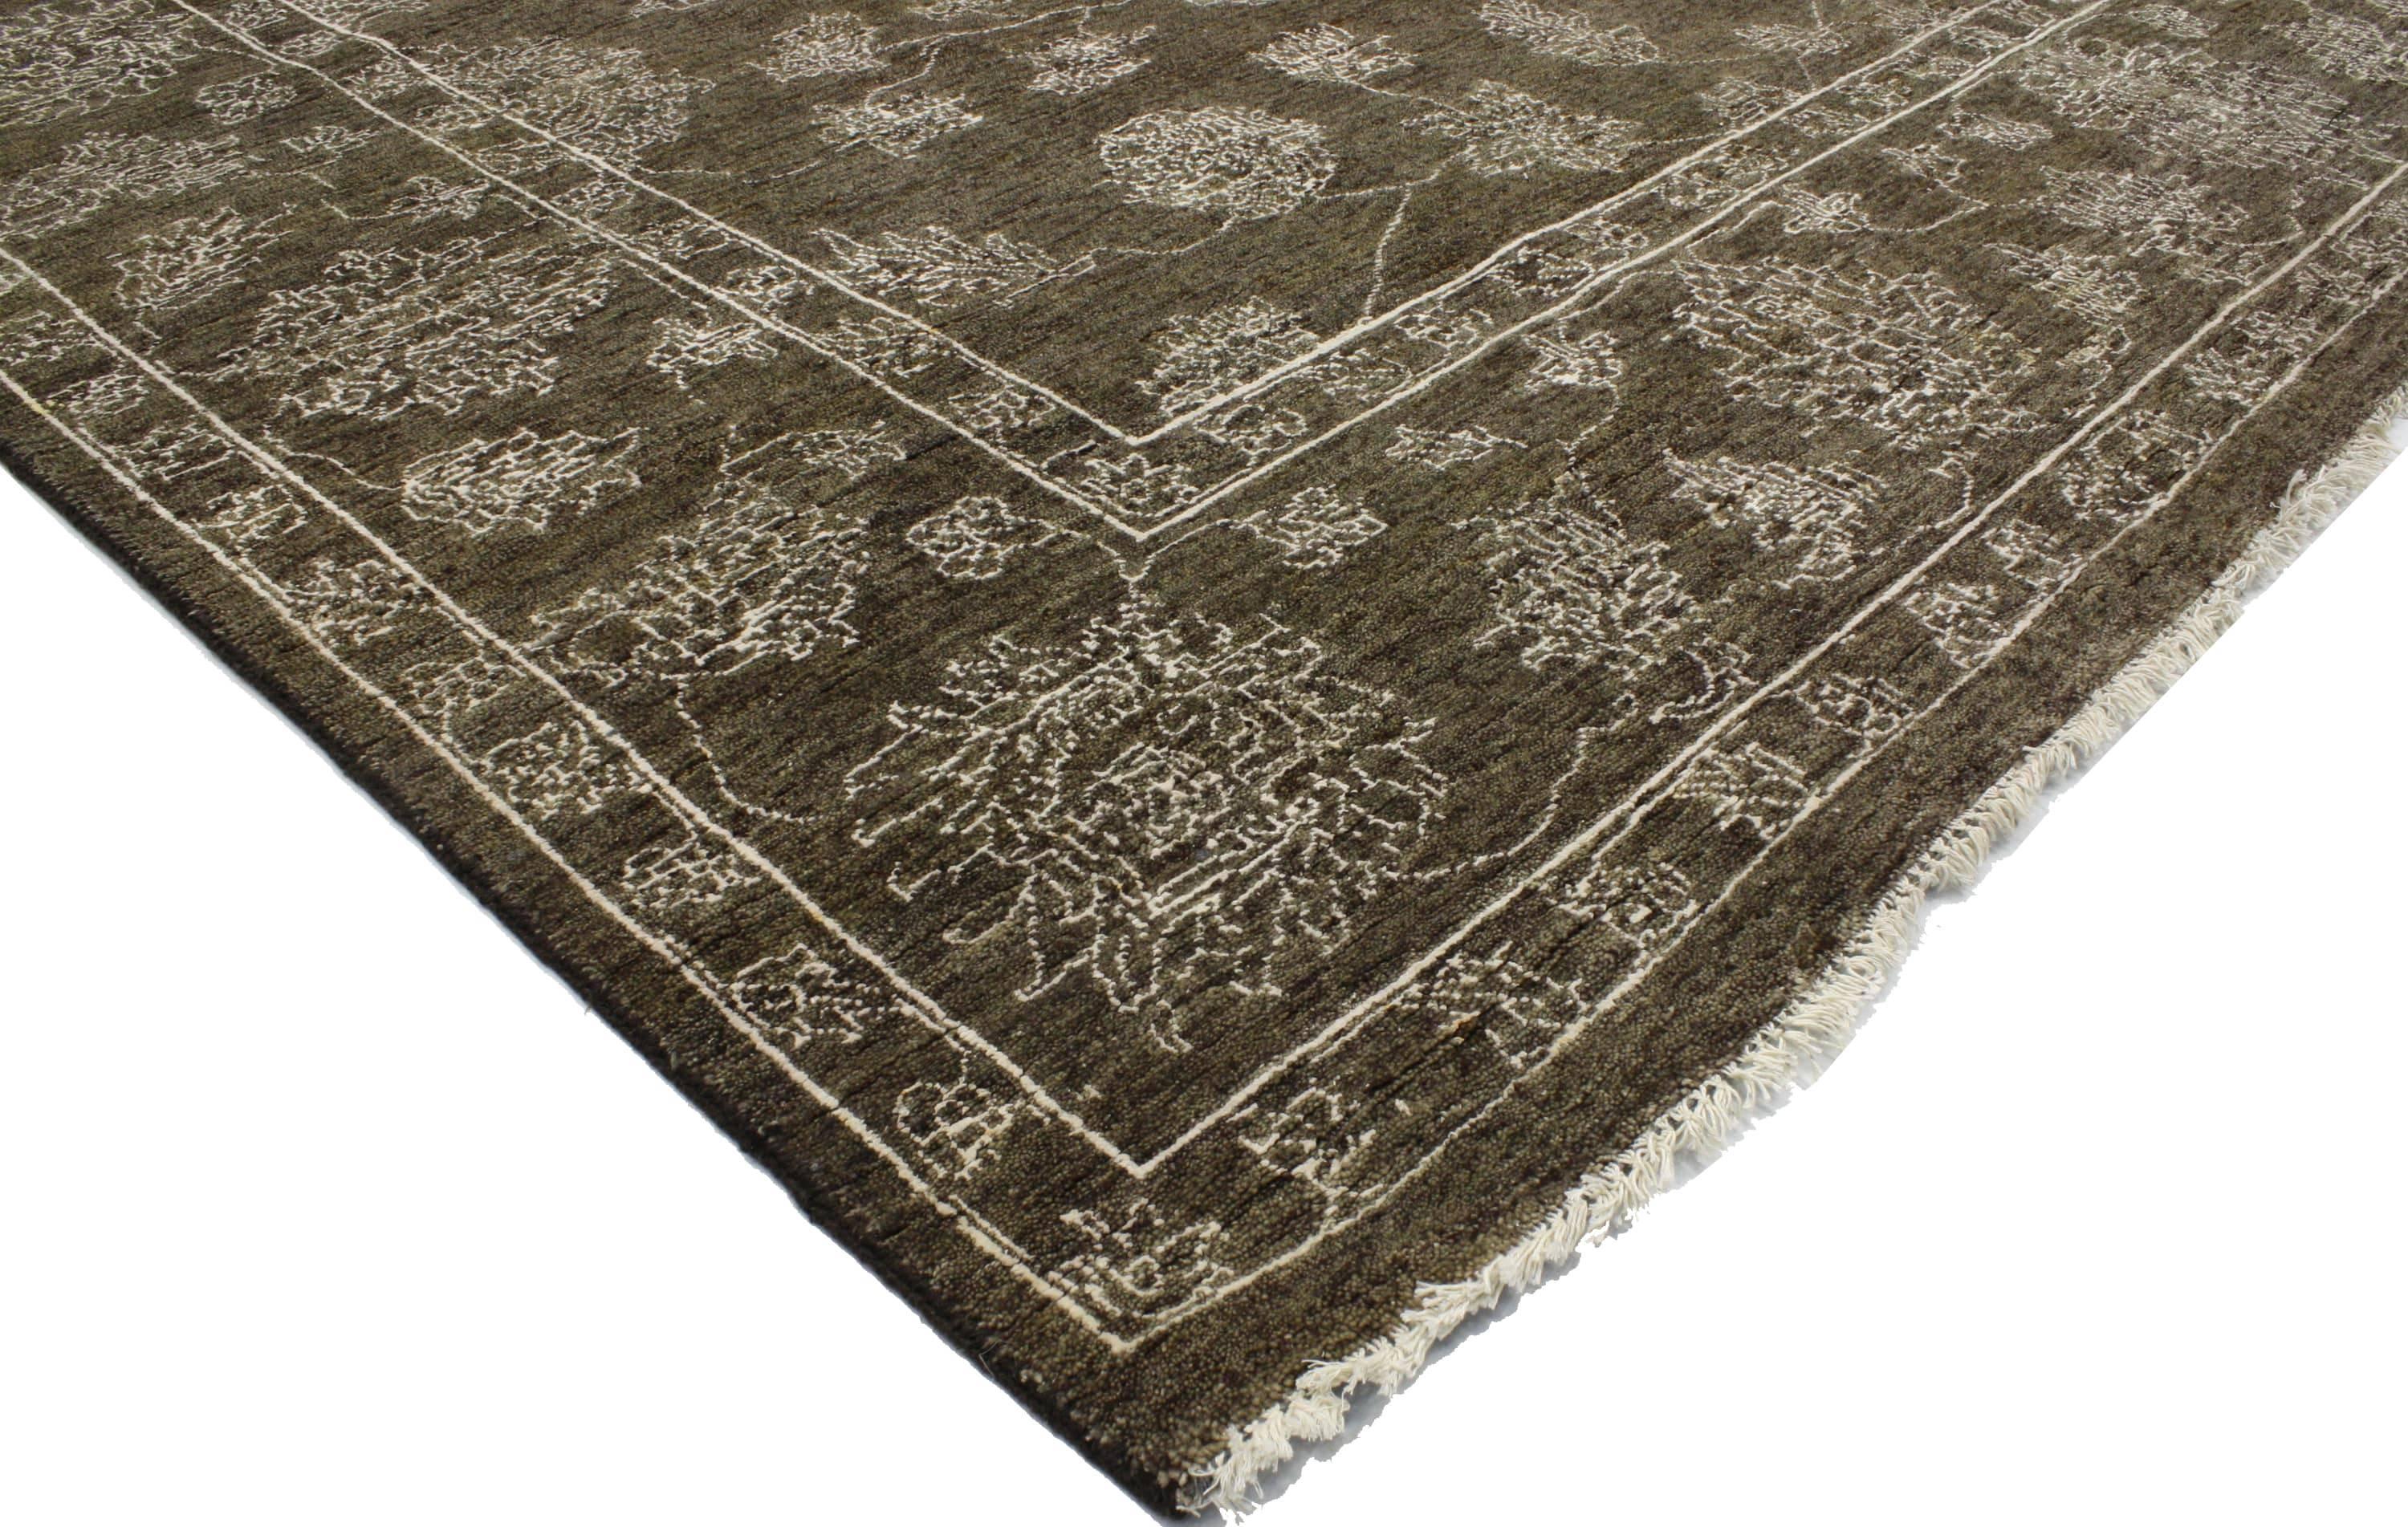 30295 New Transitional Area Rug with Oushak Pattern and Modern Style 08'00 x 12'03. Create an inimitable warmth and nostalgic charm with this hand-knotted wool Transitional Area Rug with Oushak Pattern and Modern Style. It features an all-over